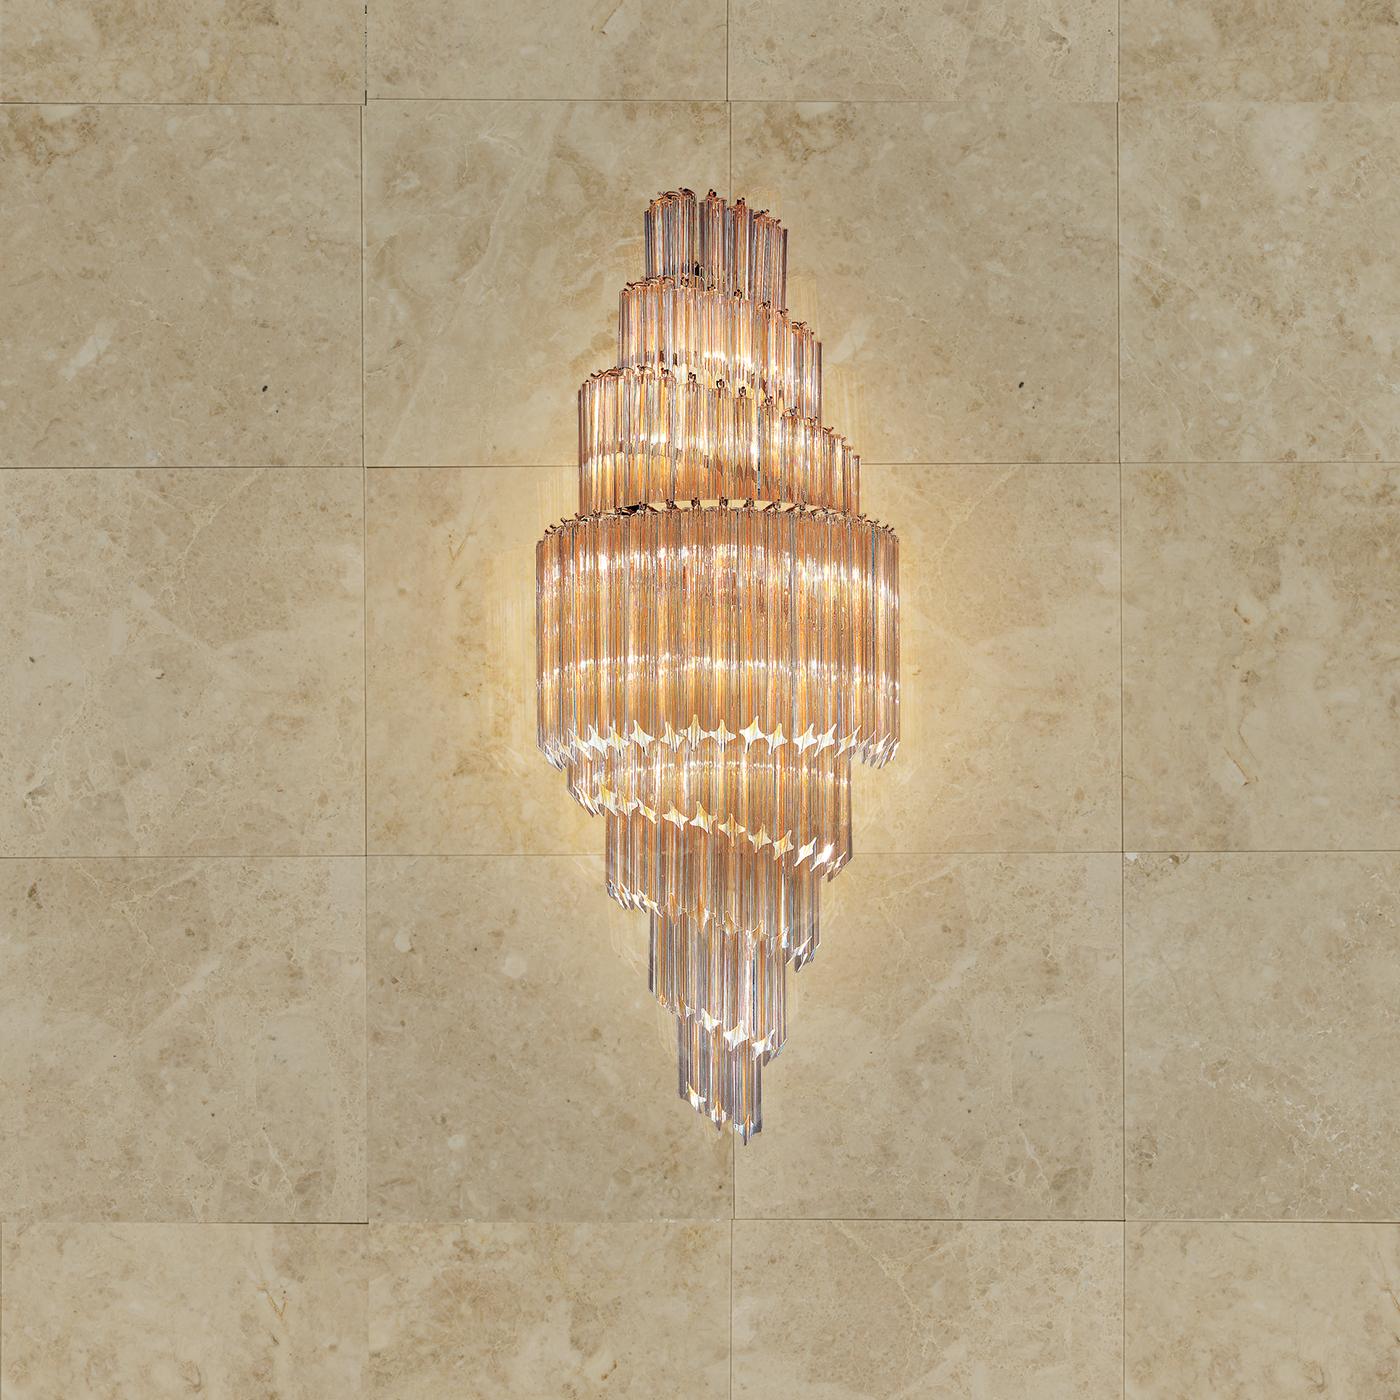 The Crystal Wall Light takes the timeless elegance of a classic chandelier and transforms it into a stylish wall light with a modern twist. Luxurious lead crystal pieces are arranged into a spiral configuration, creating a dynamic feel in any